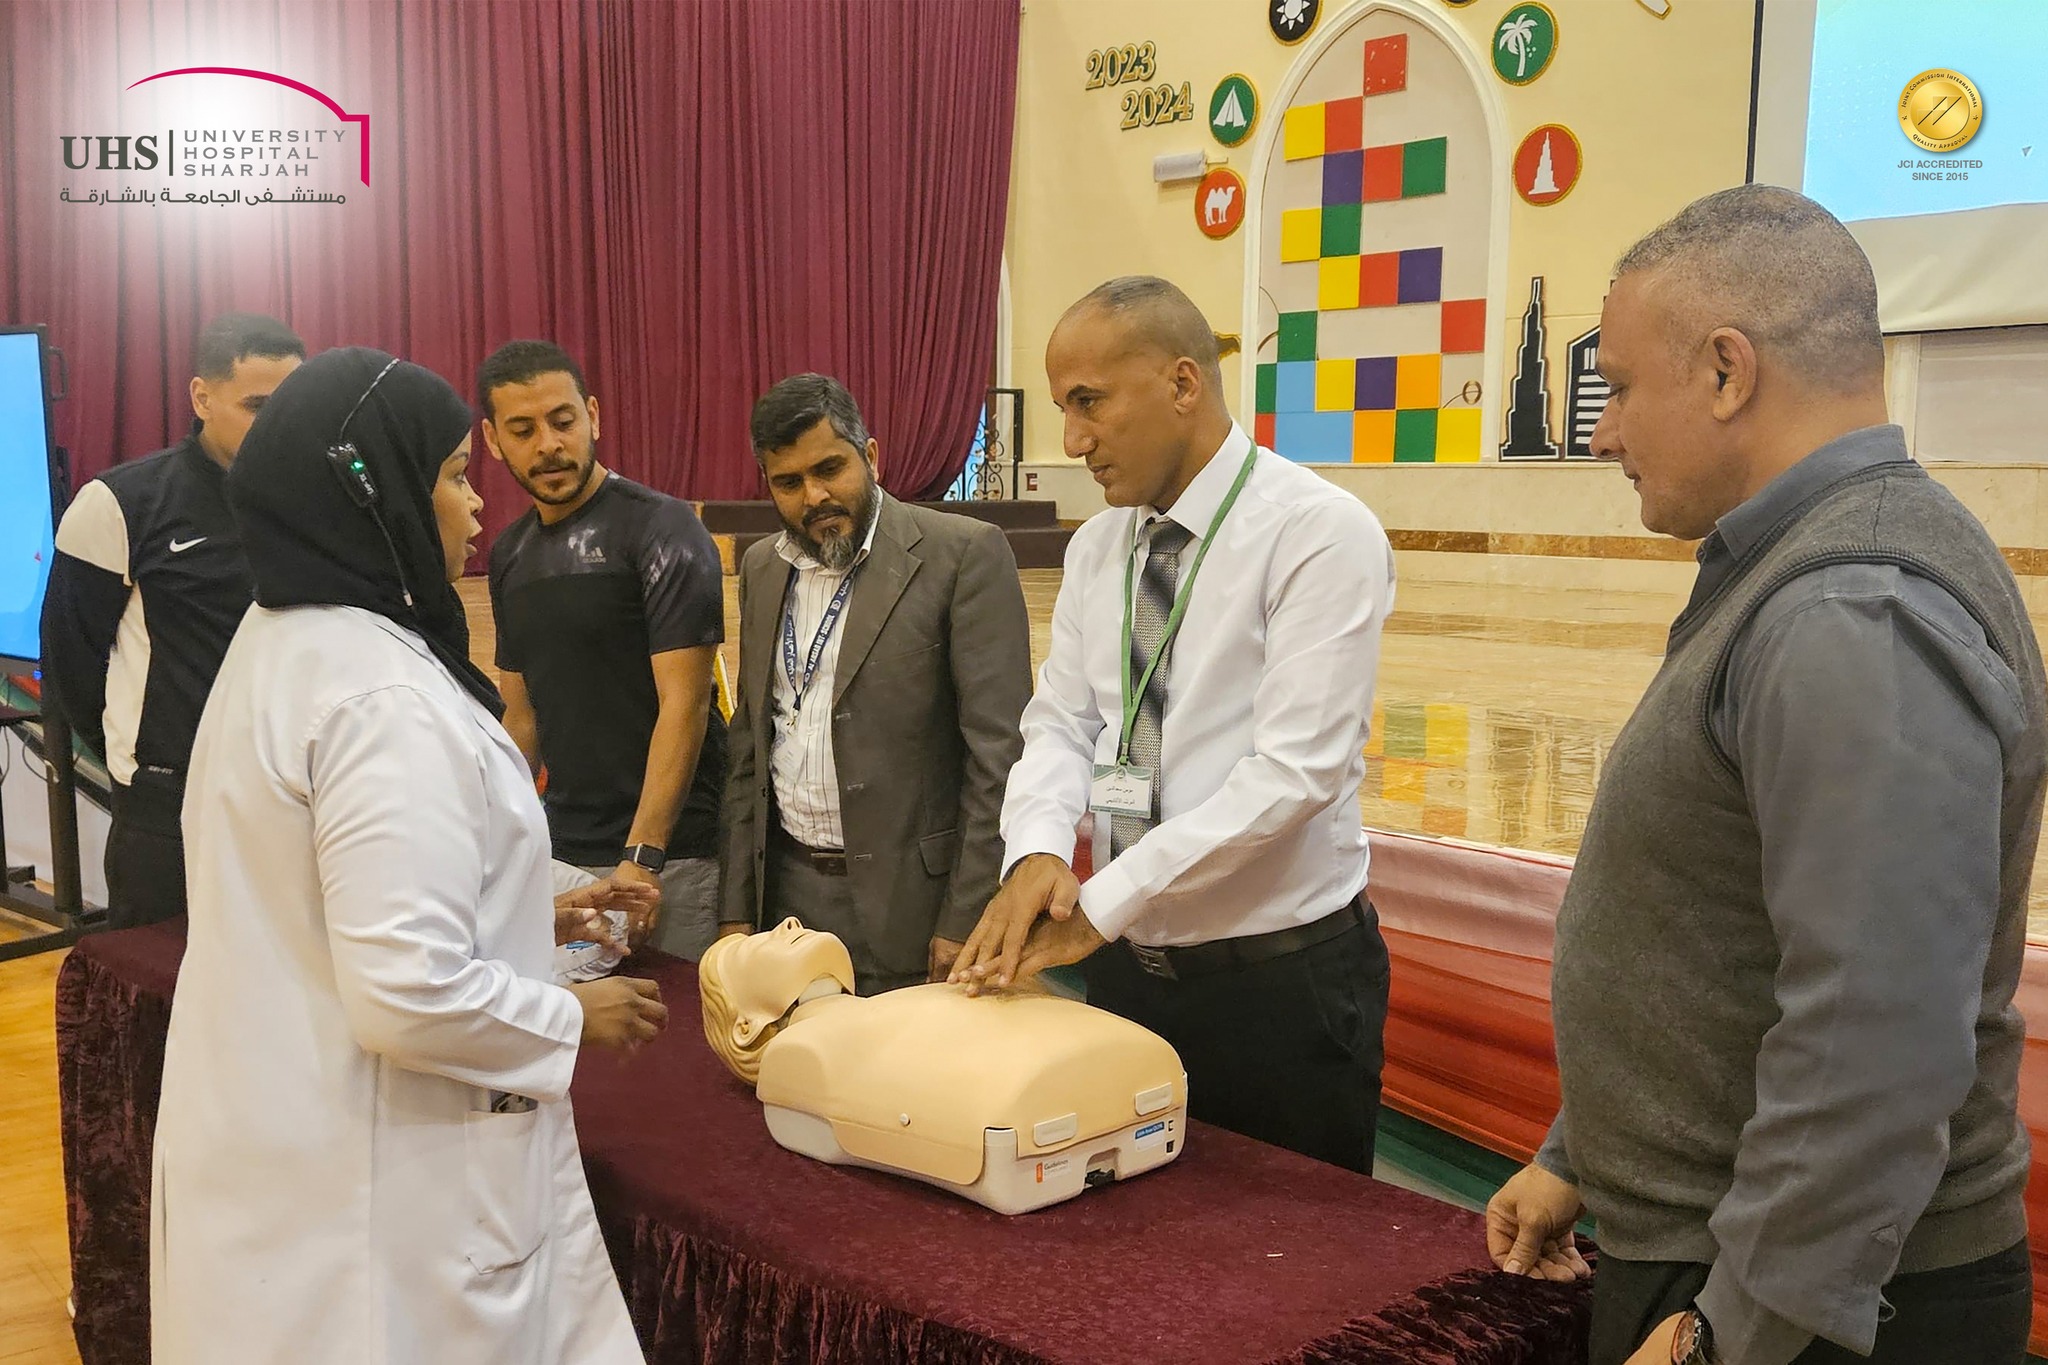 First Aid Workshop " Every Second Counts"